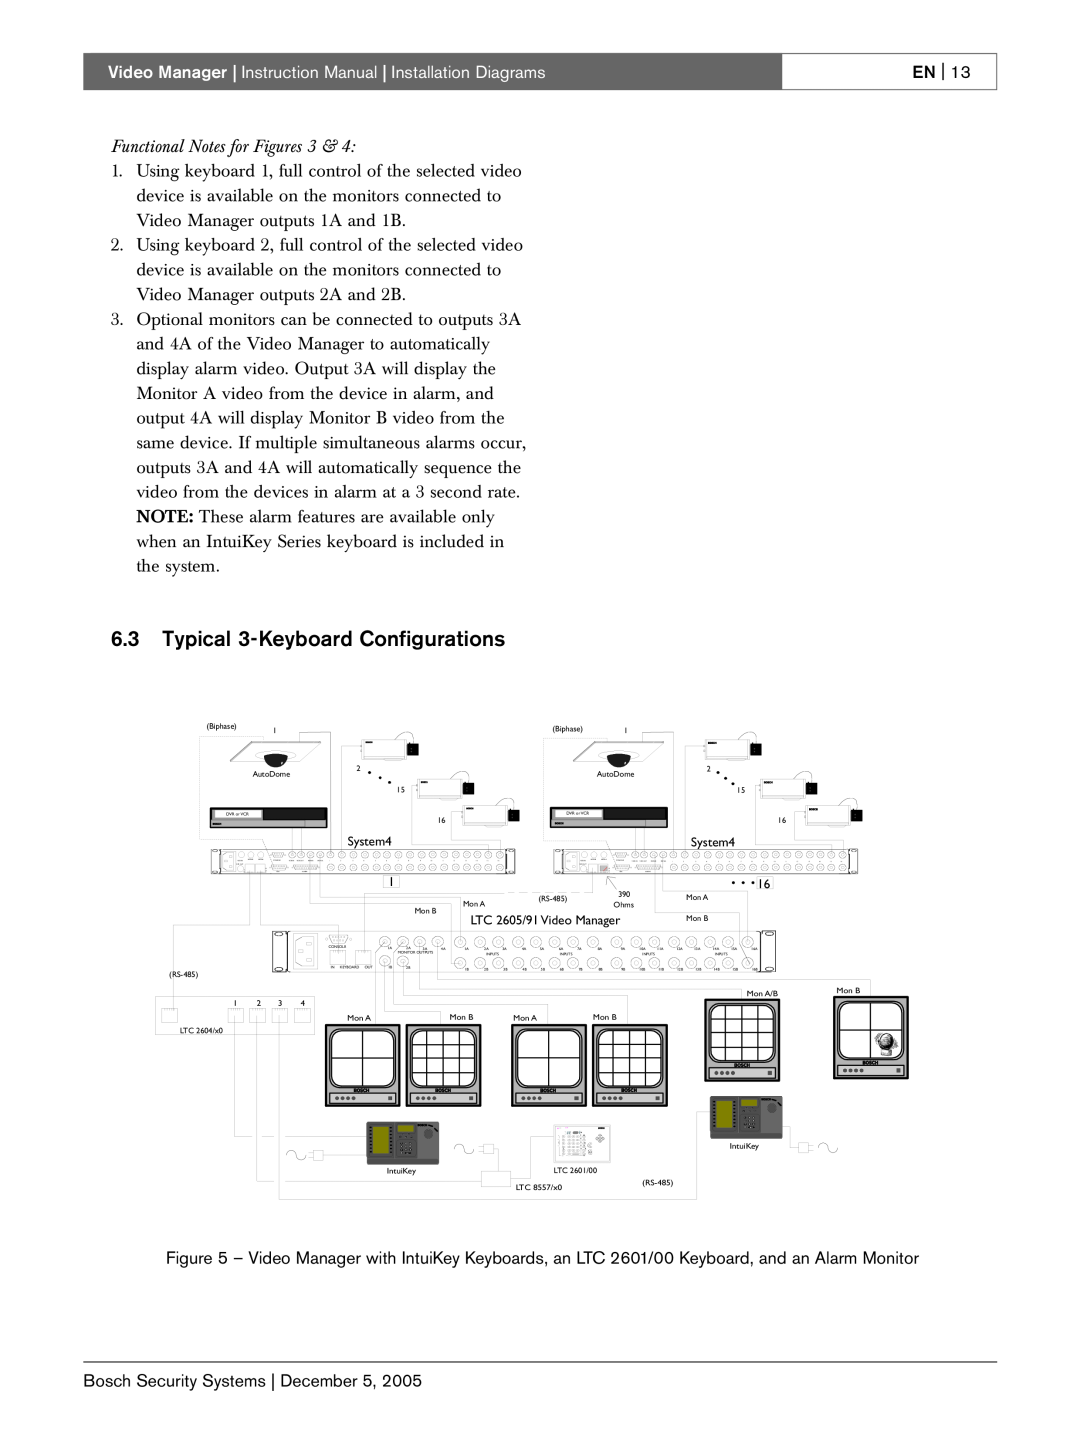 Bosch Appliances LTC 2605/91 instruction manual 6.3Typical 3-KeyboardConfigurations, Functional Notes for Figures, En 